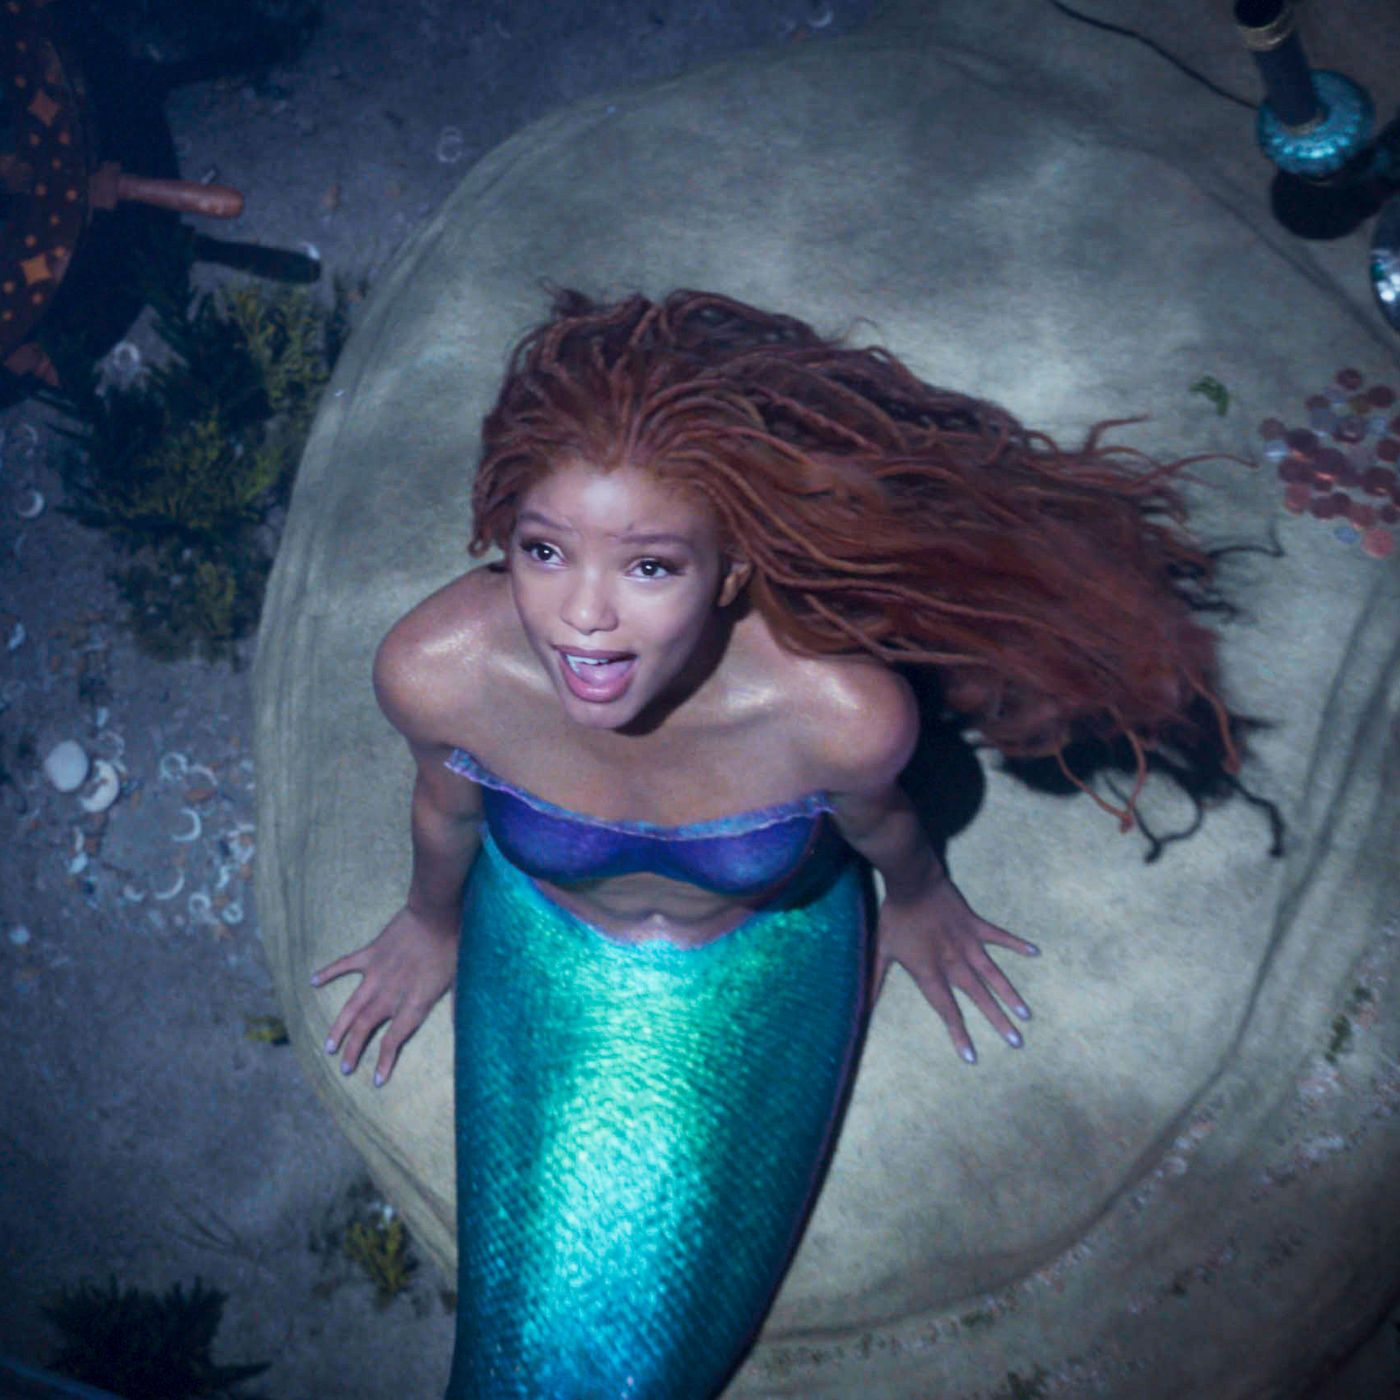 The Little Mermaid Remake Is As Bad As You Thought